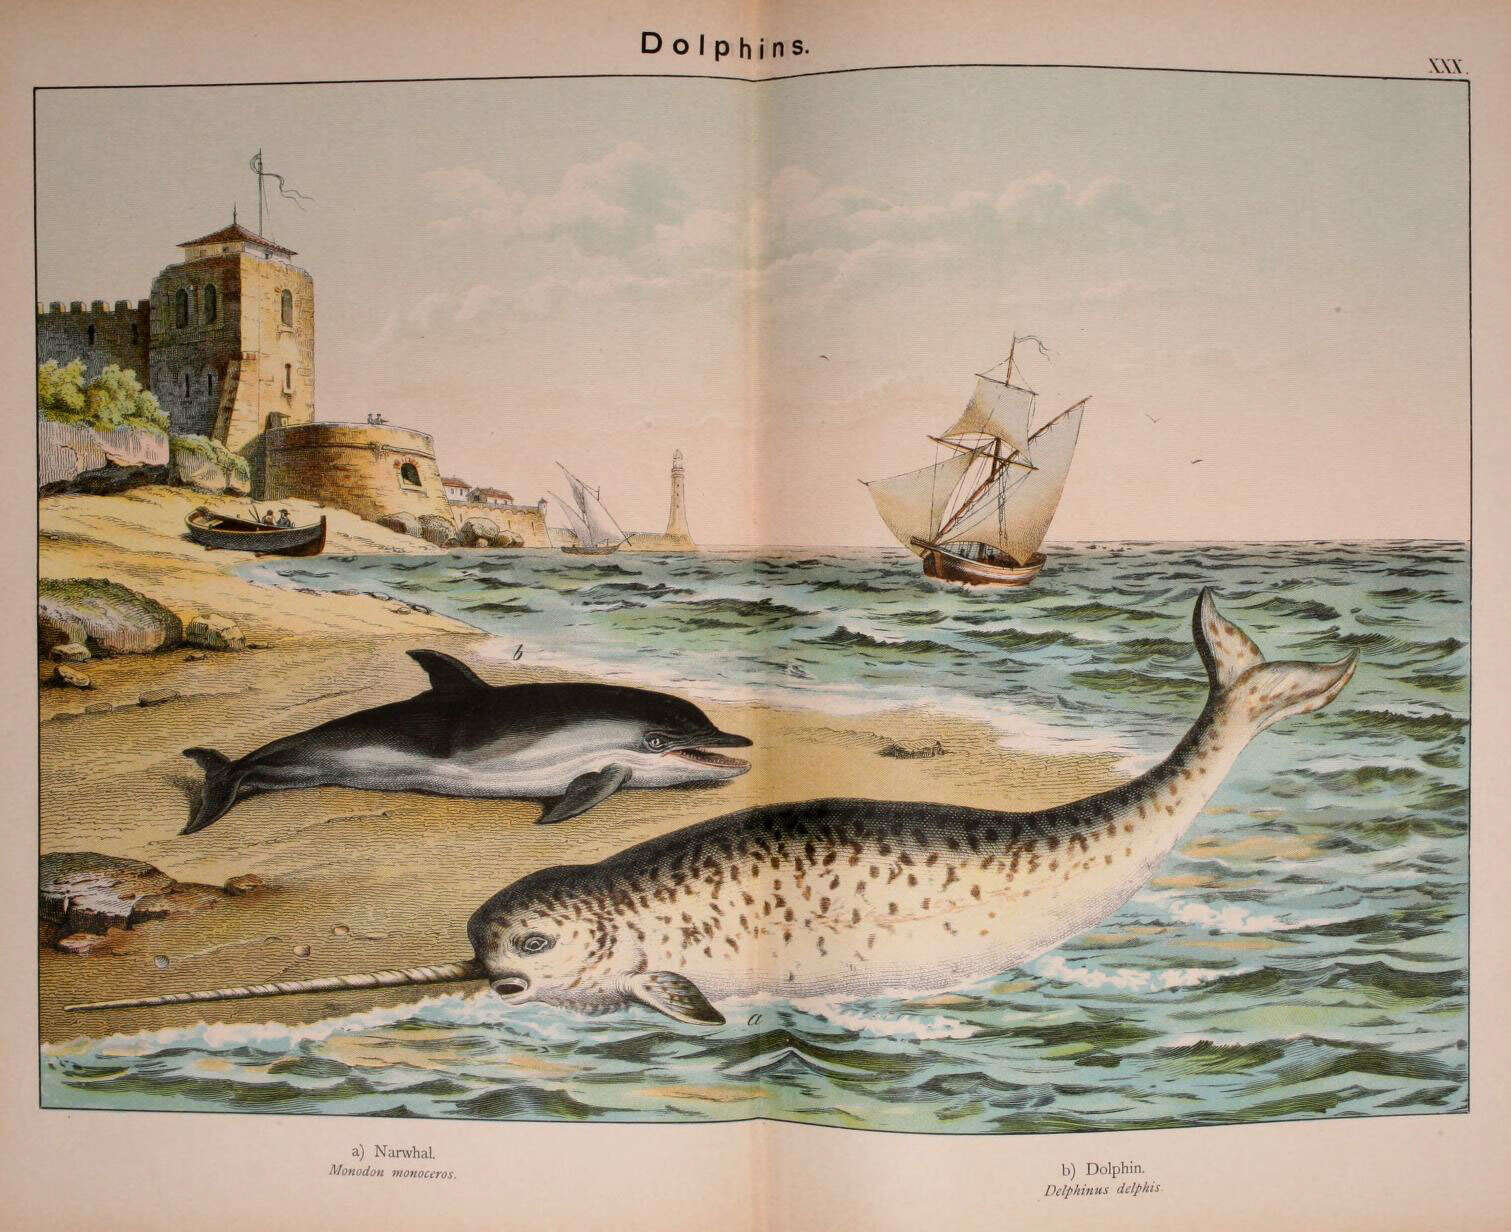 Image of narwhal